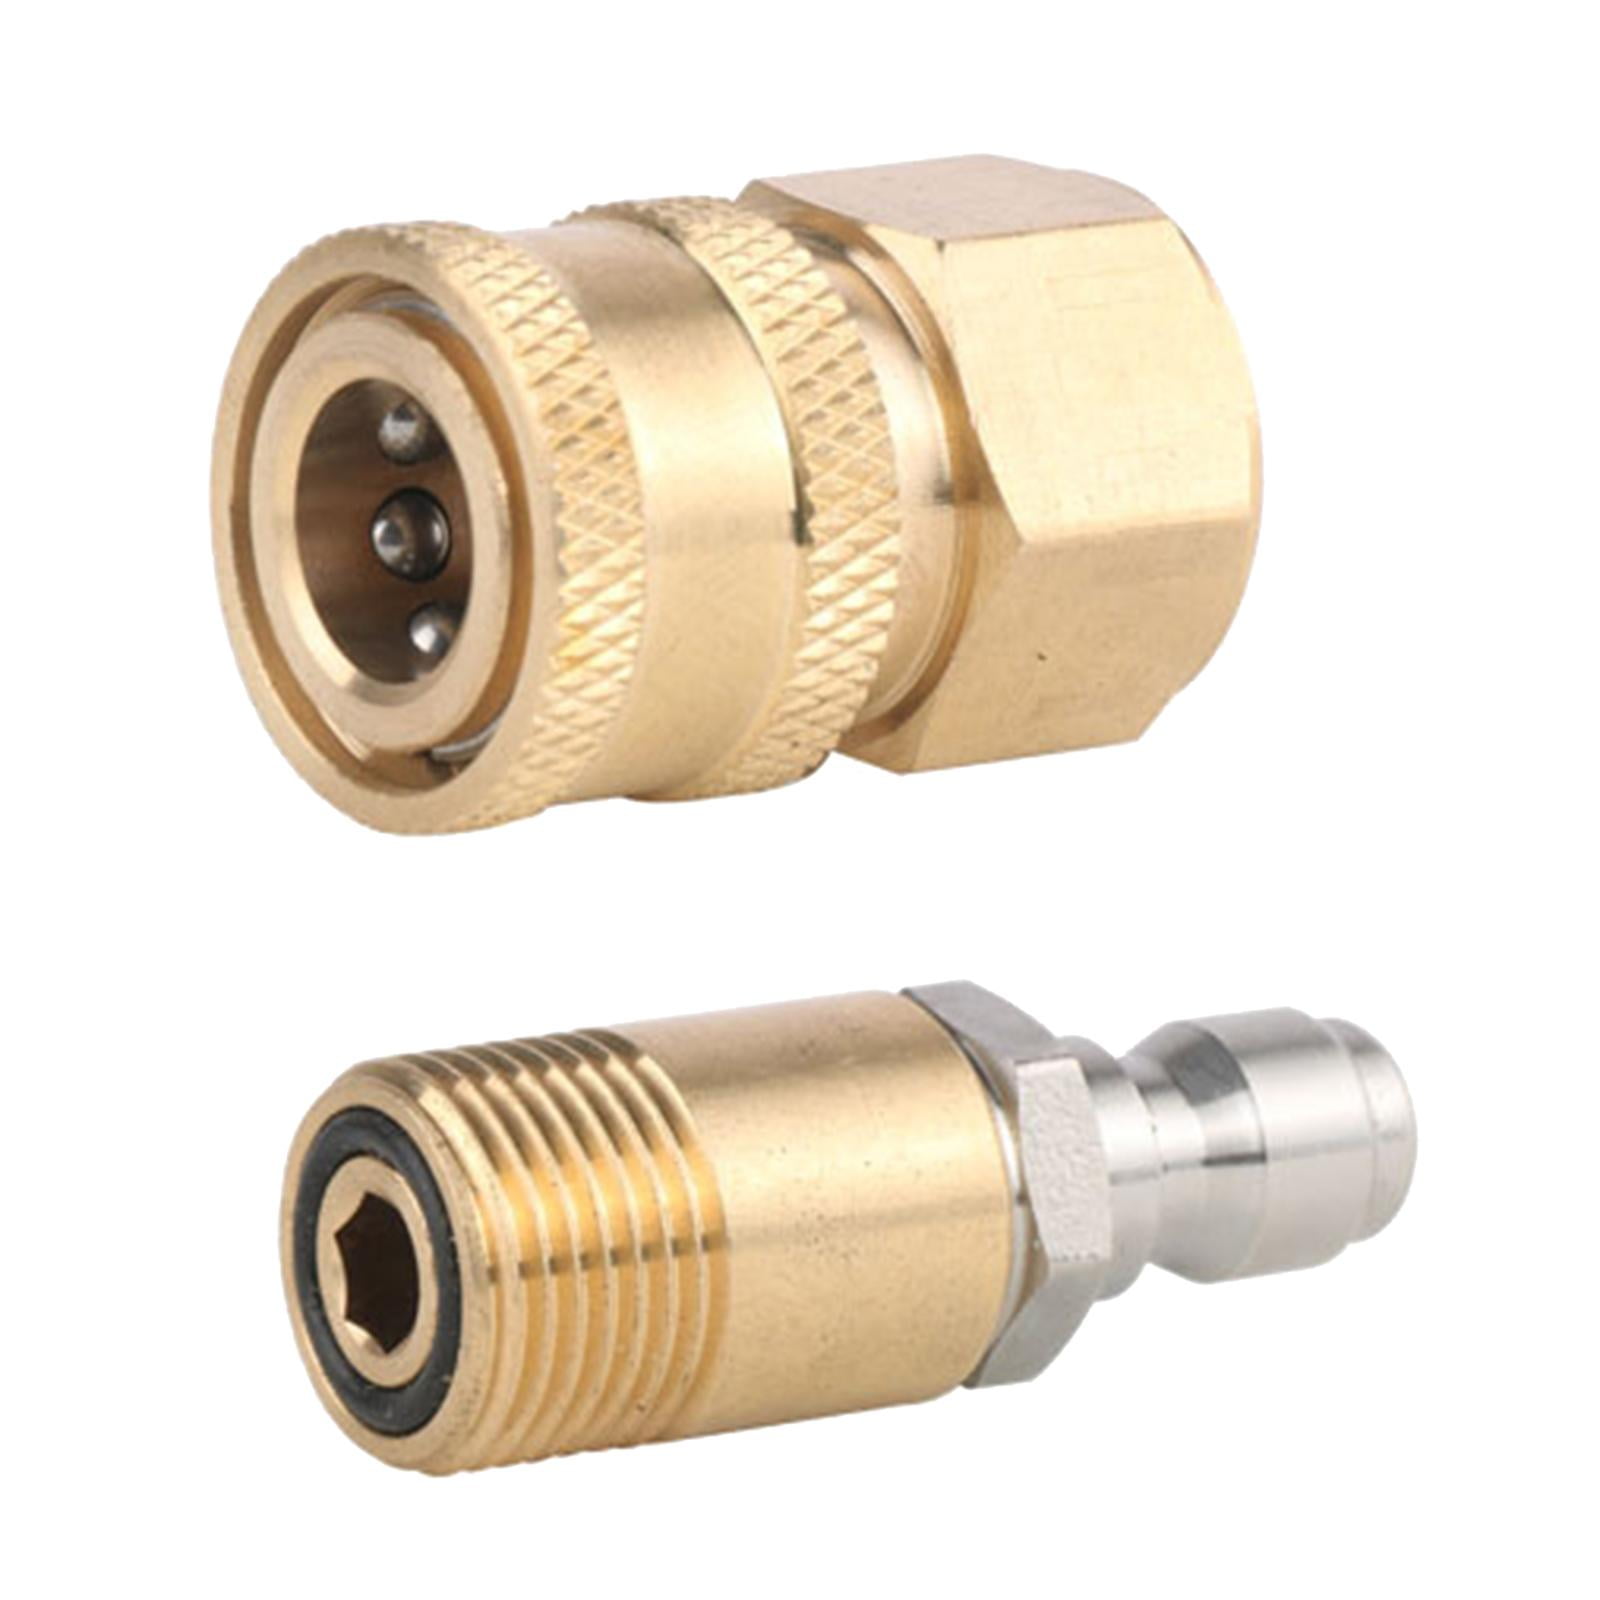 Brass Quick Disconnect Coupler 1/4" Male Threads For Pressure Washers. 